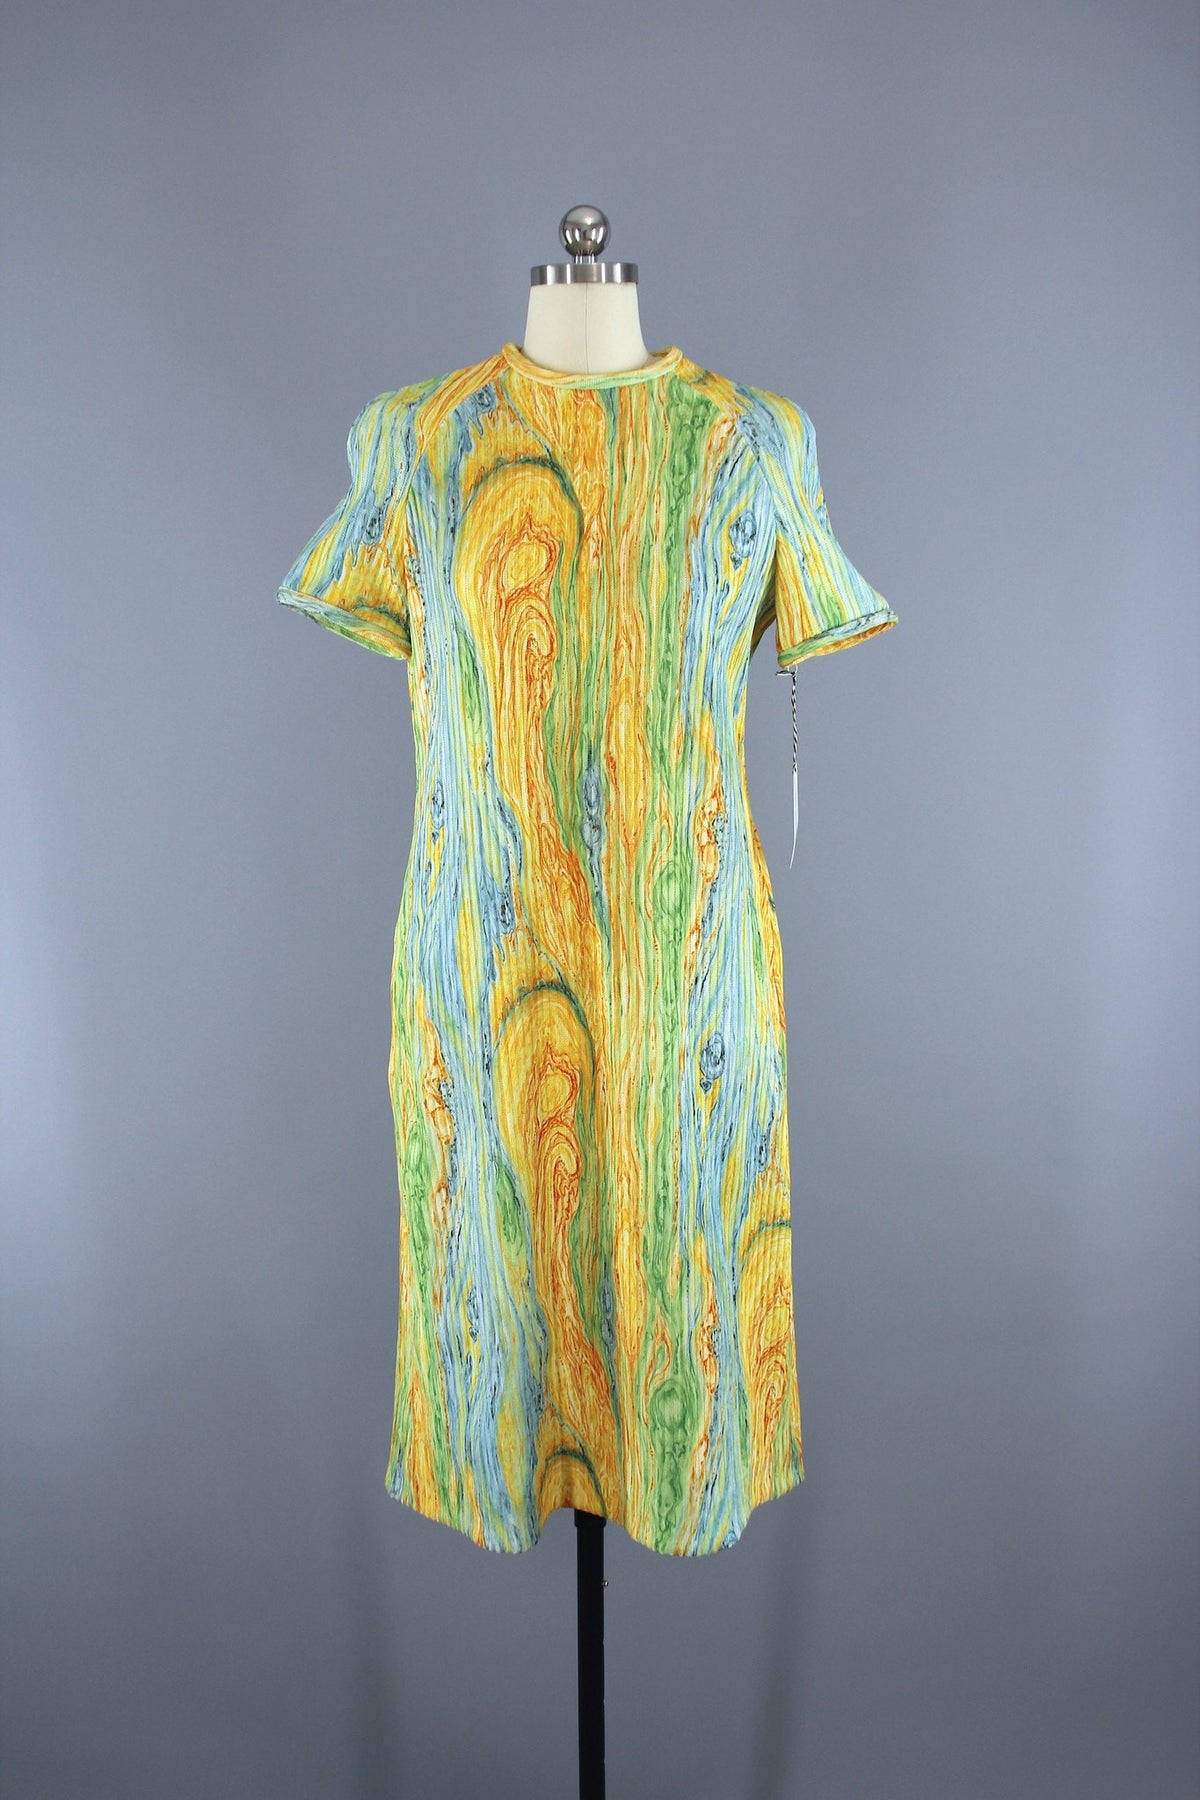 Vintage 1960s Knit Sweater Dress in Yellow Aqua Psychedelic Swirl / Le